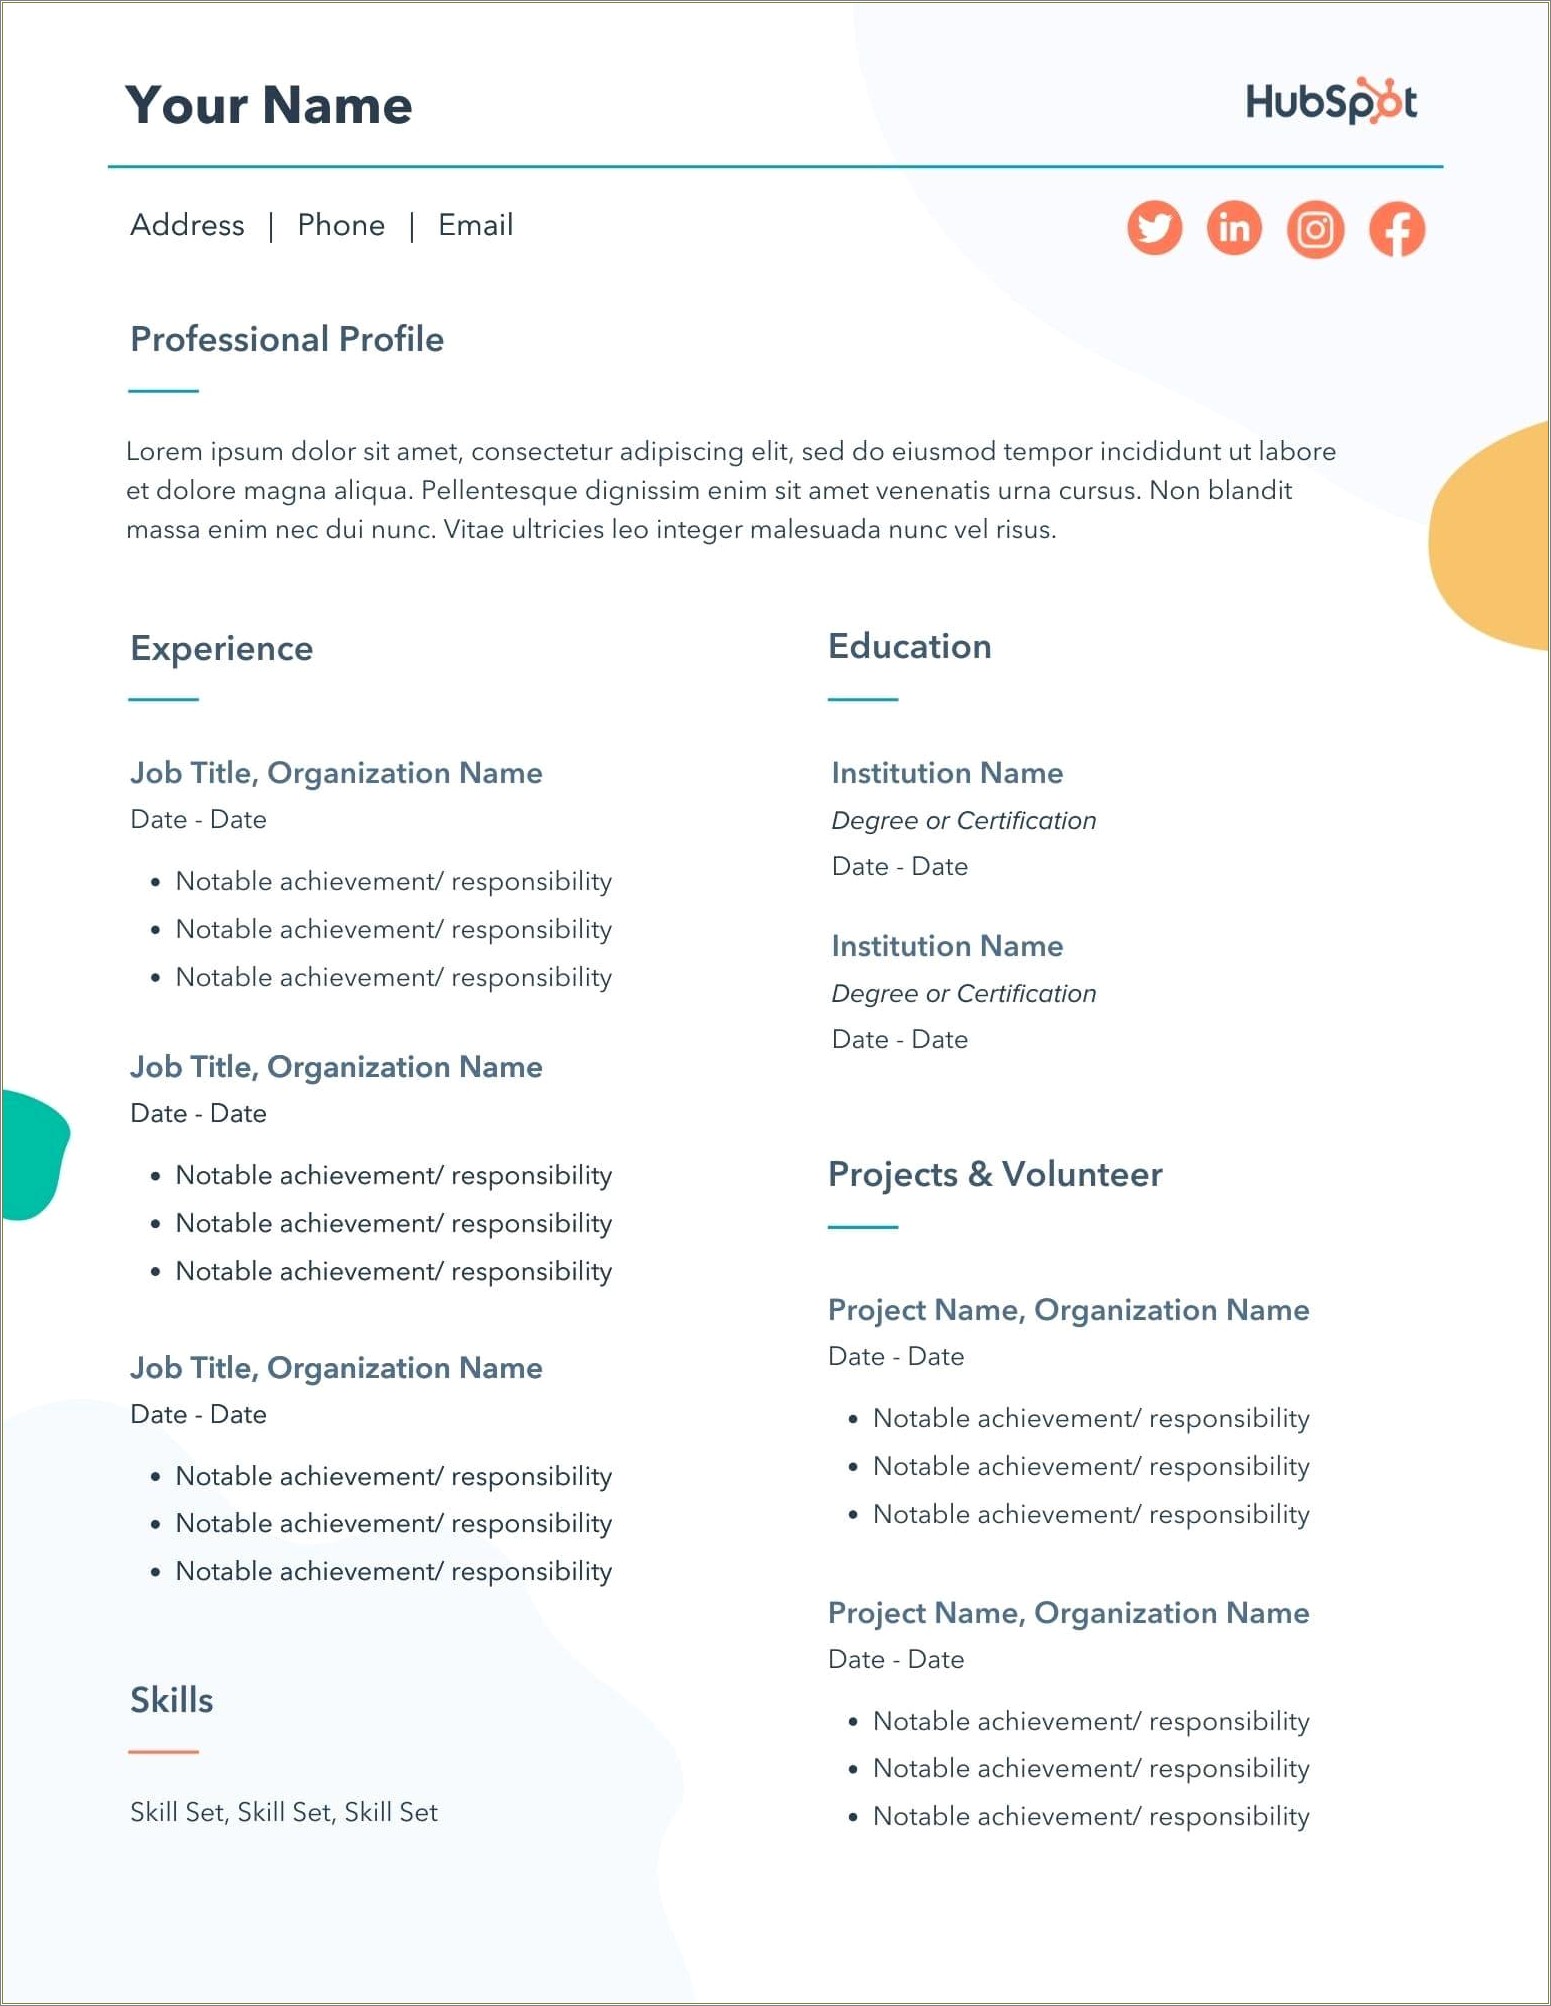 Job Title For Small Business Owner Resume